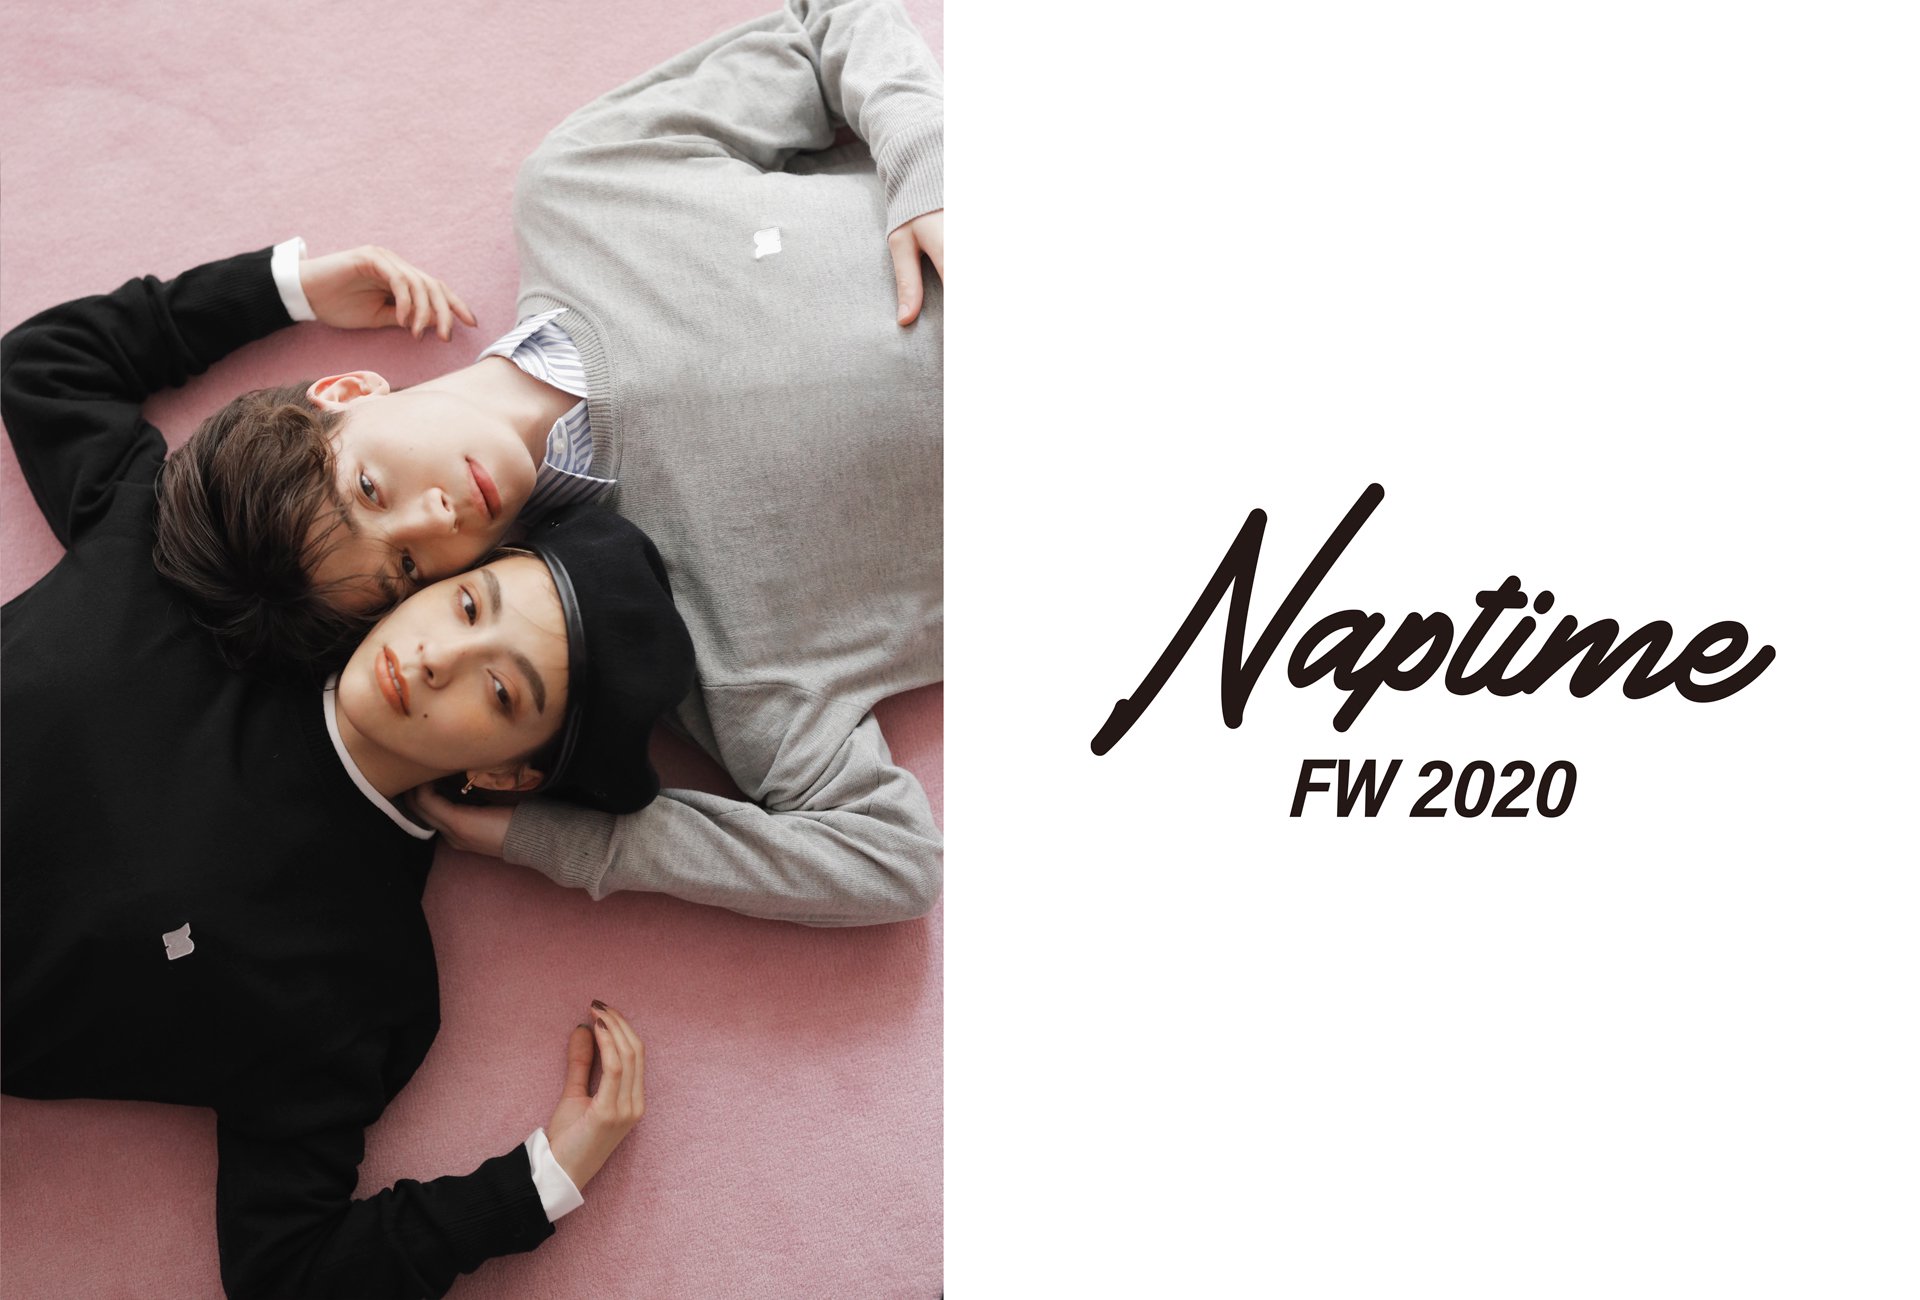 Naptime. COLLECTION 20FW